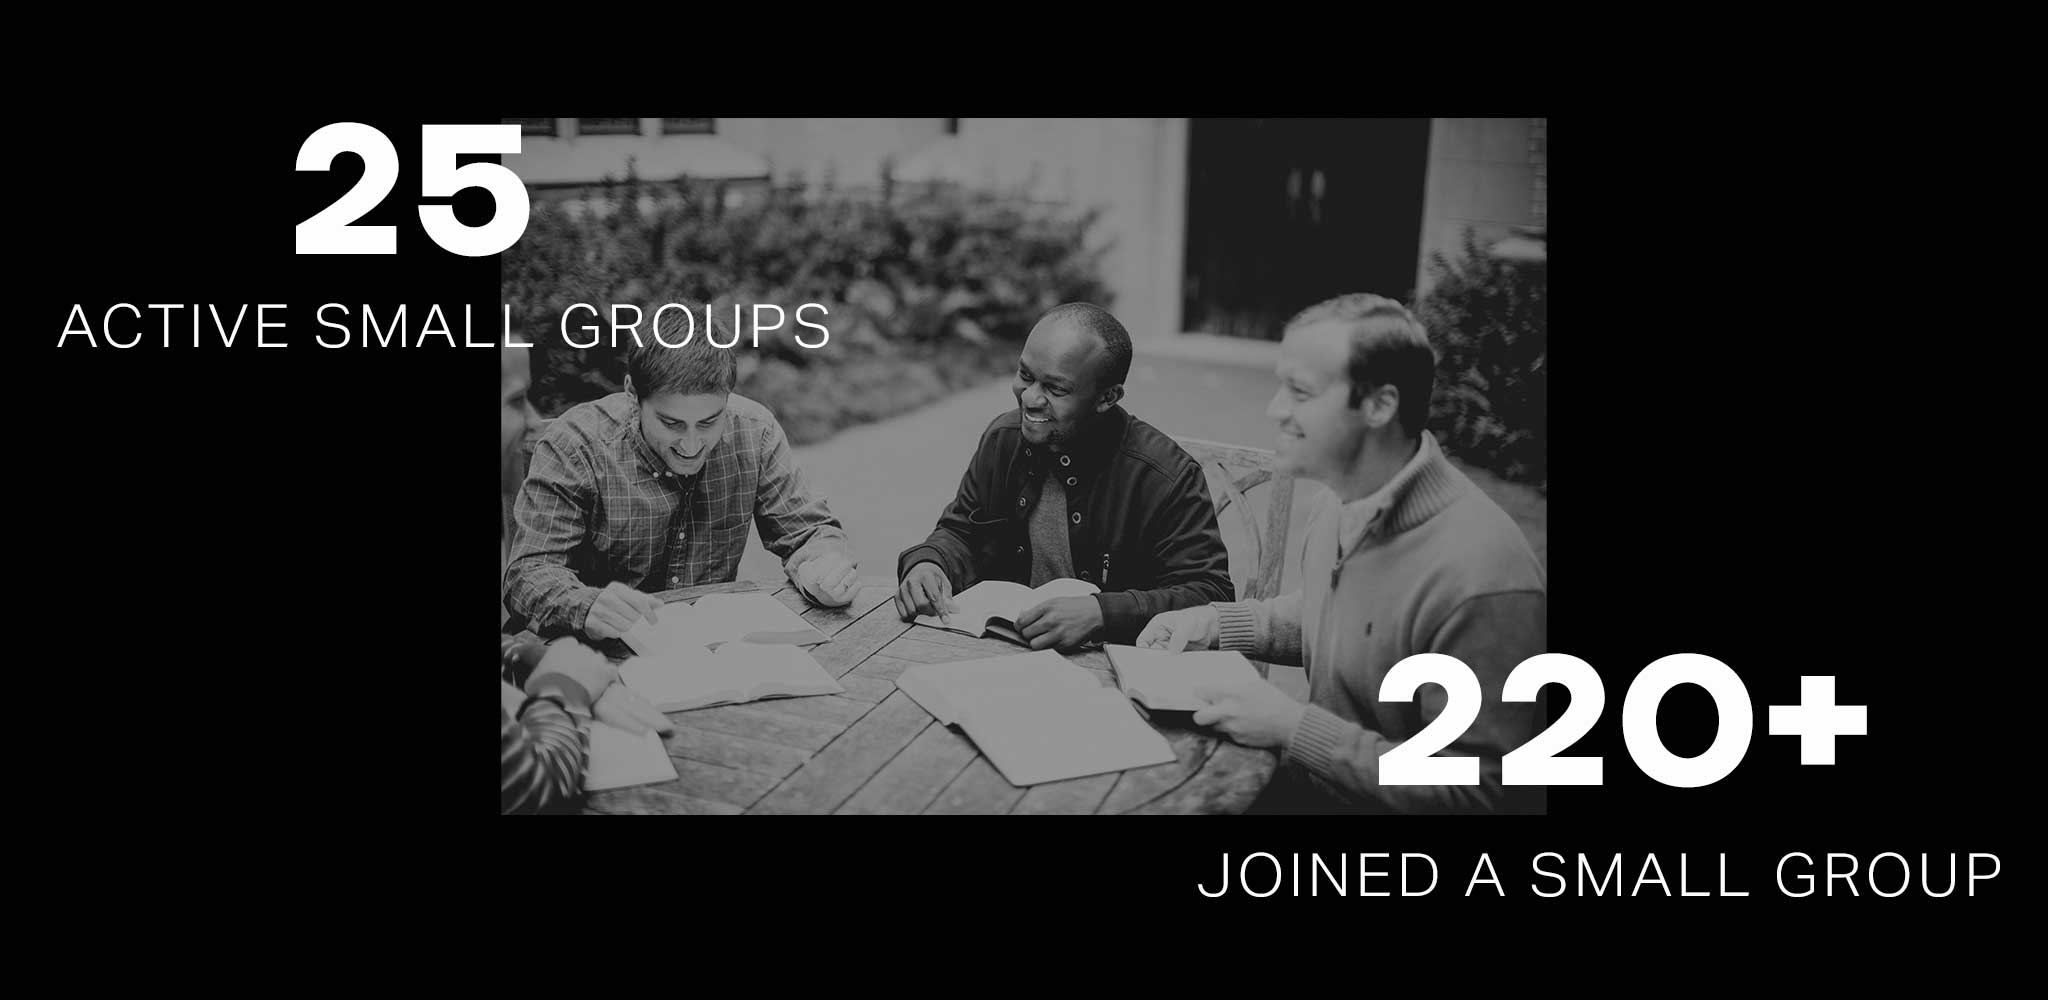 We facilitated 25 small groups, with over 220 people in attendance.